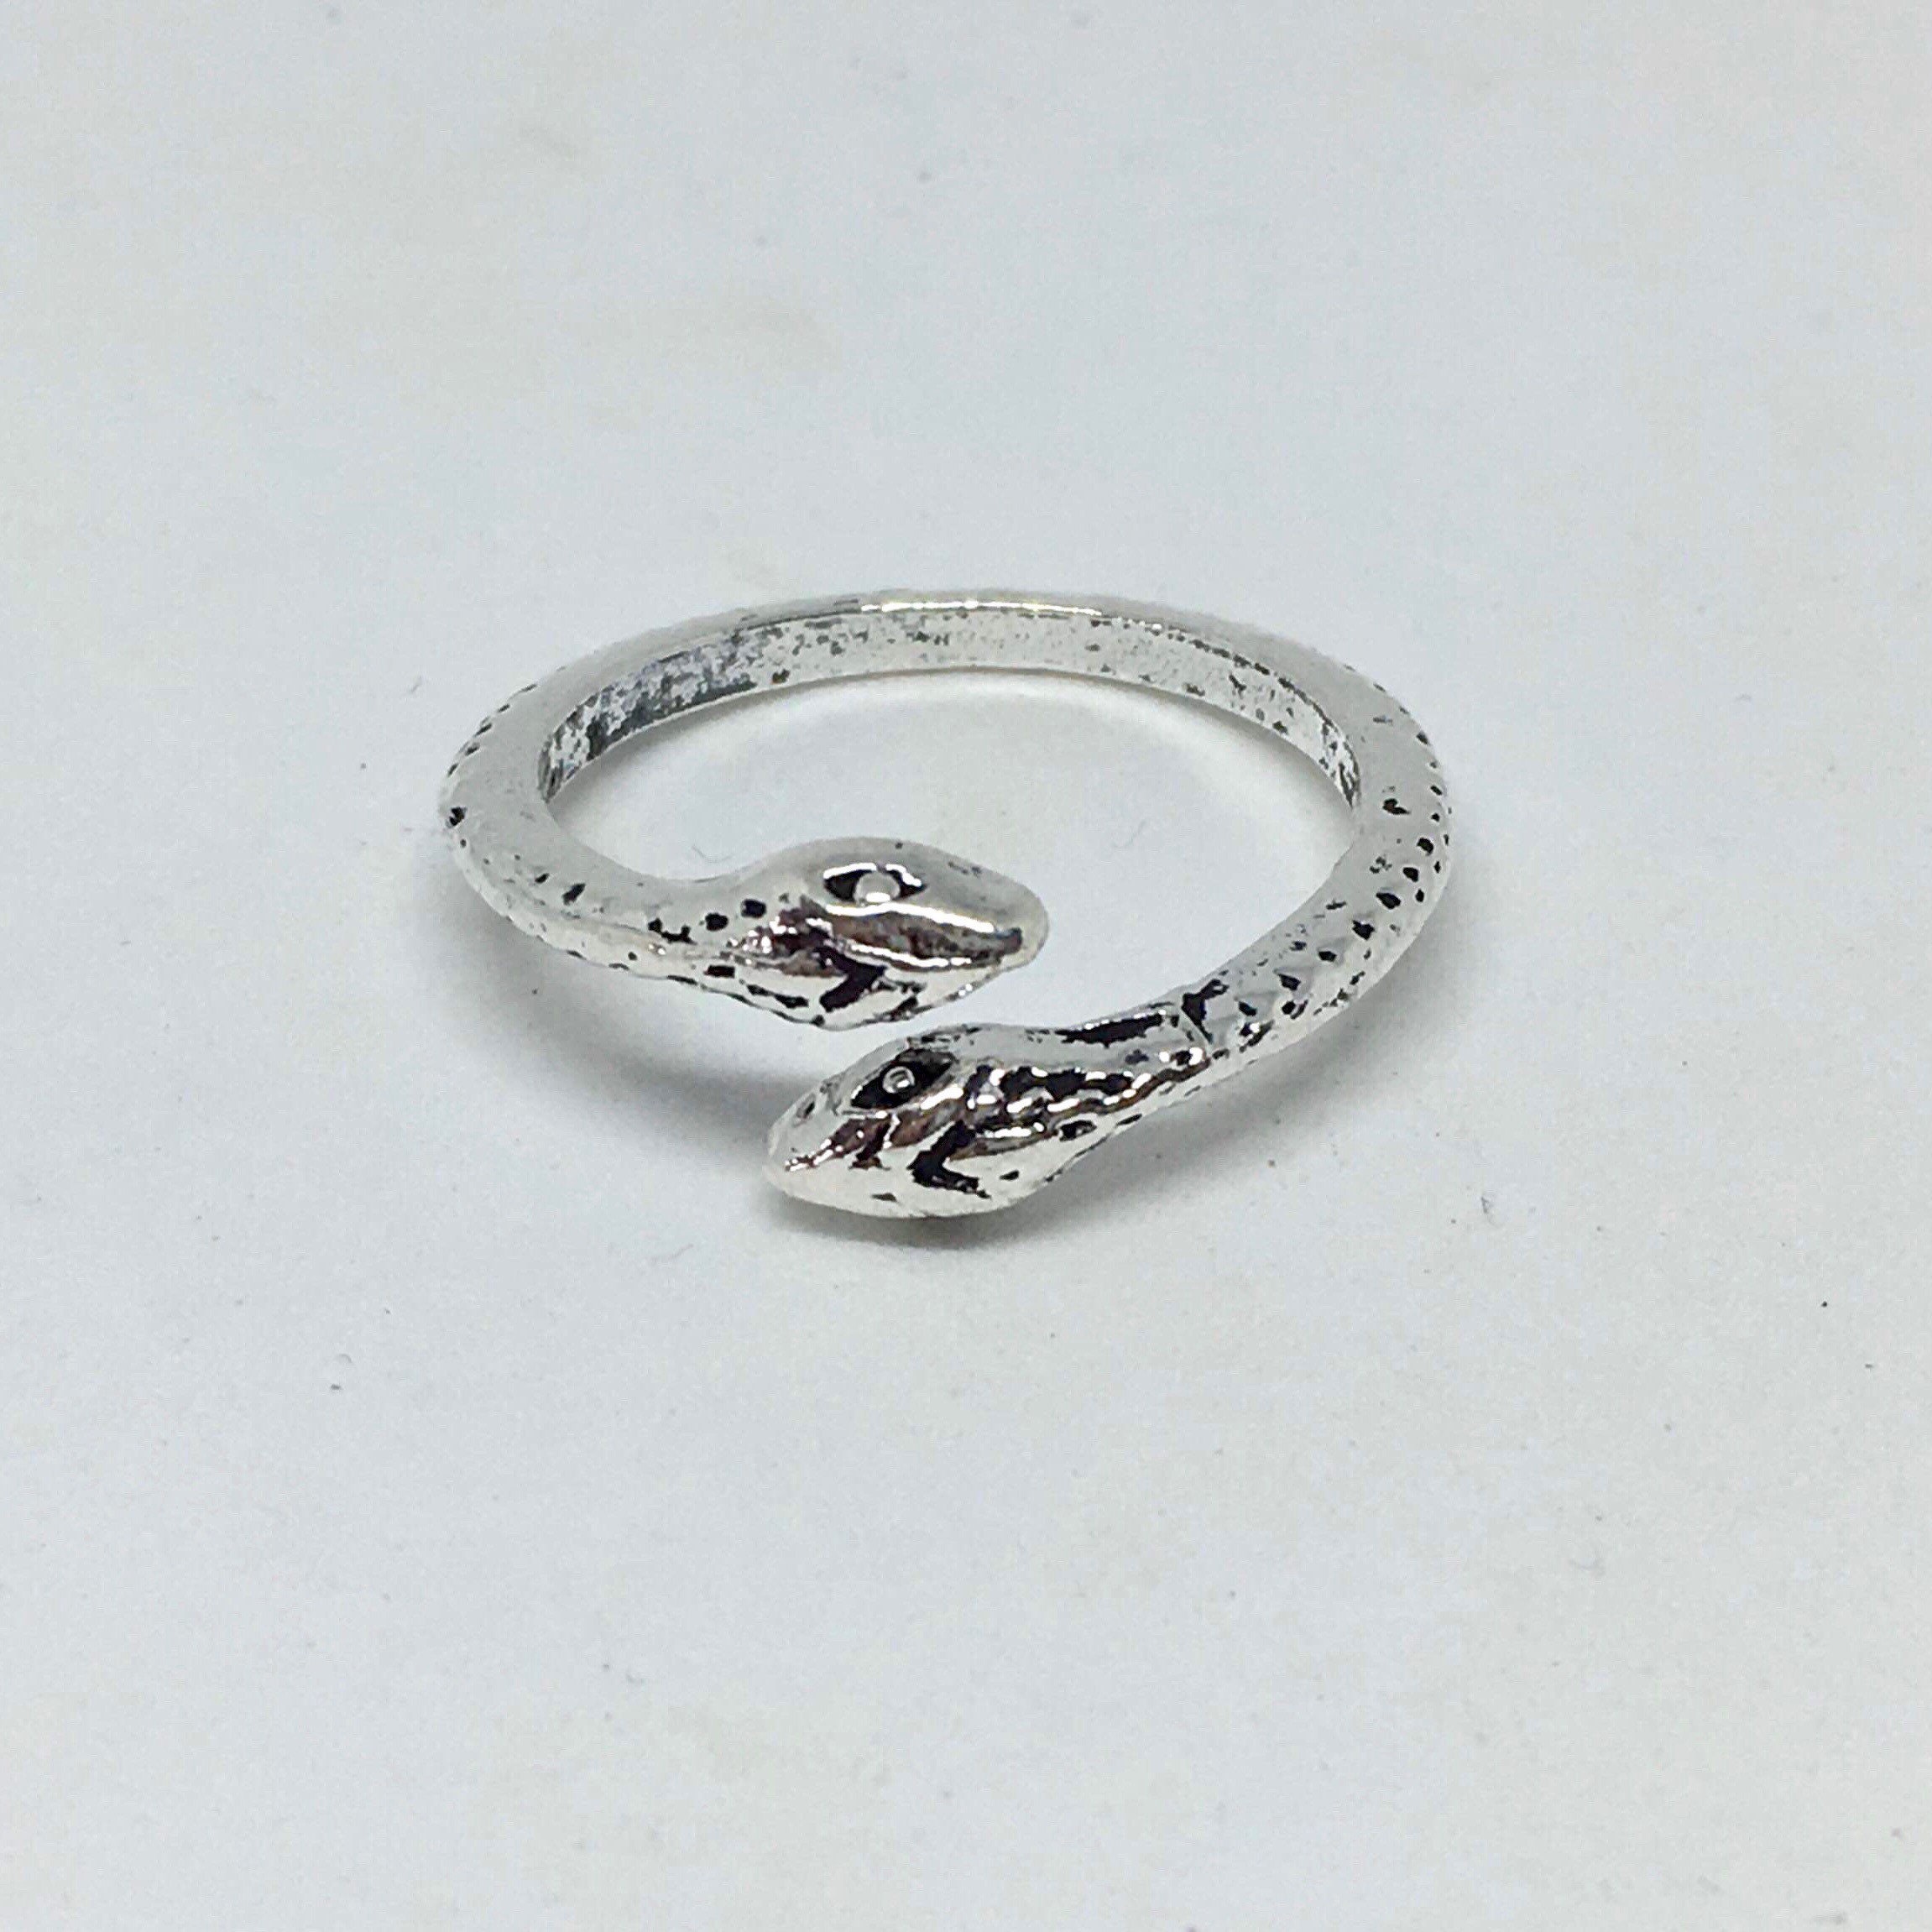 Wraparound Serpent Ring Sterling Silver Plated Adjustable | Etsy